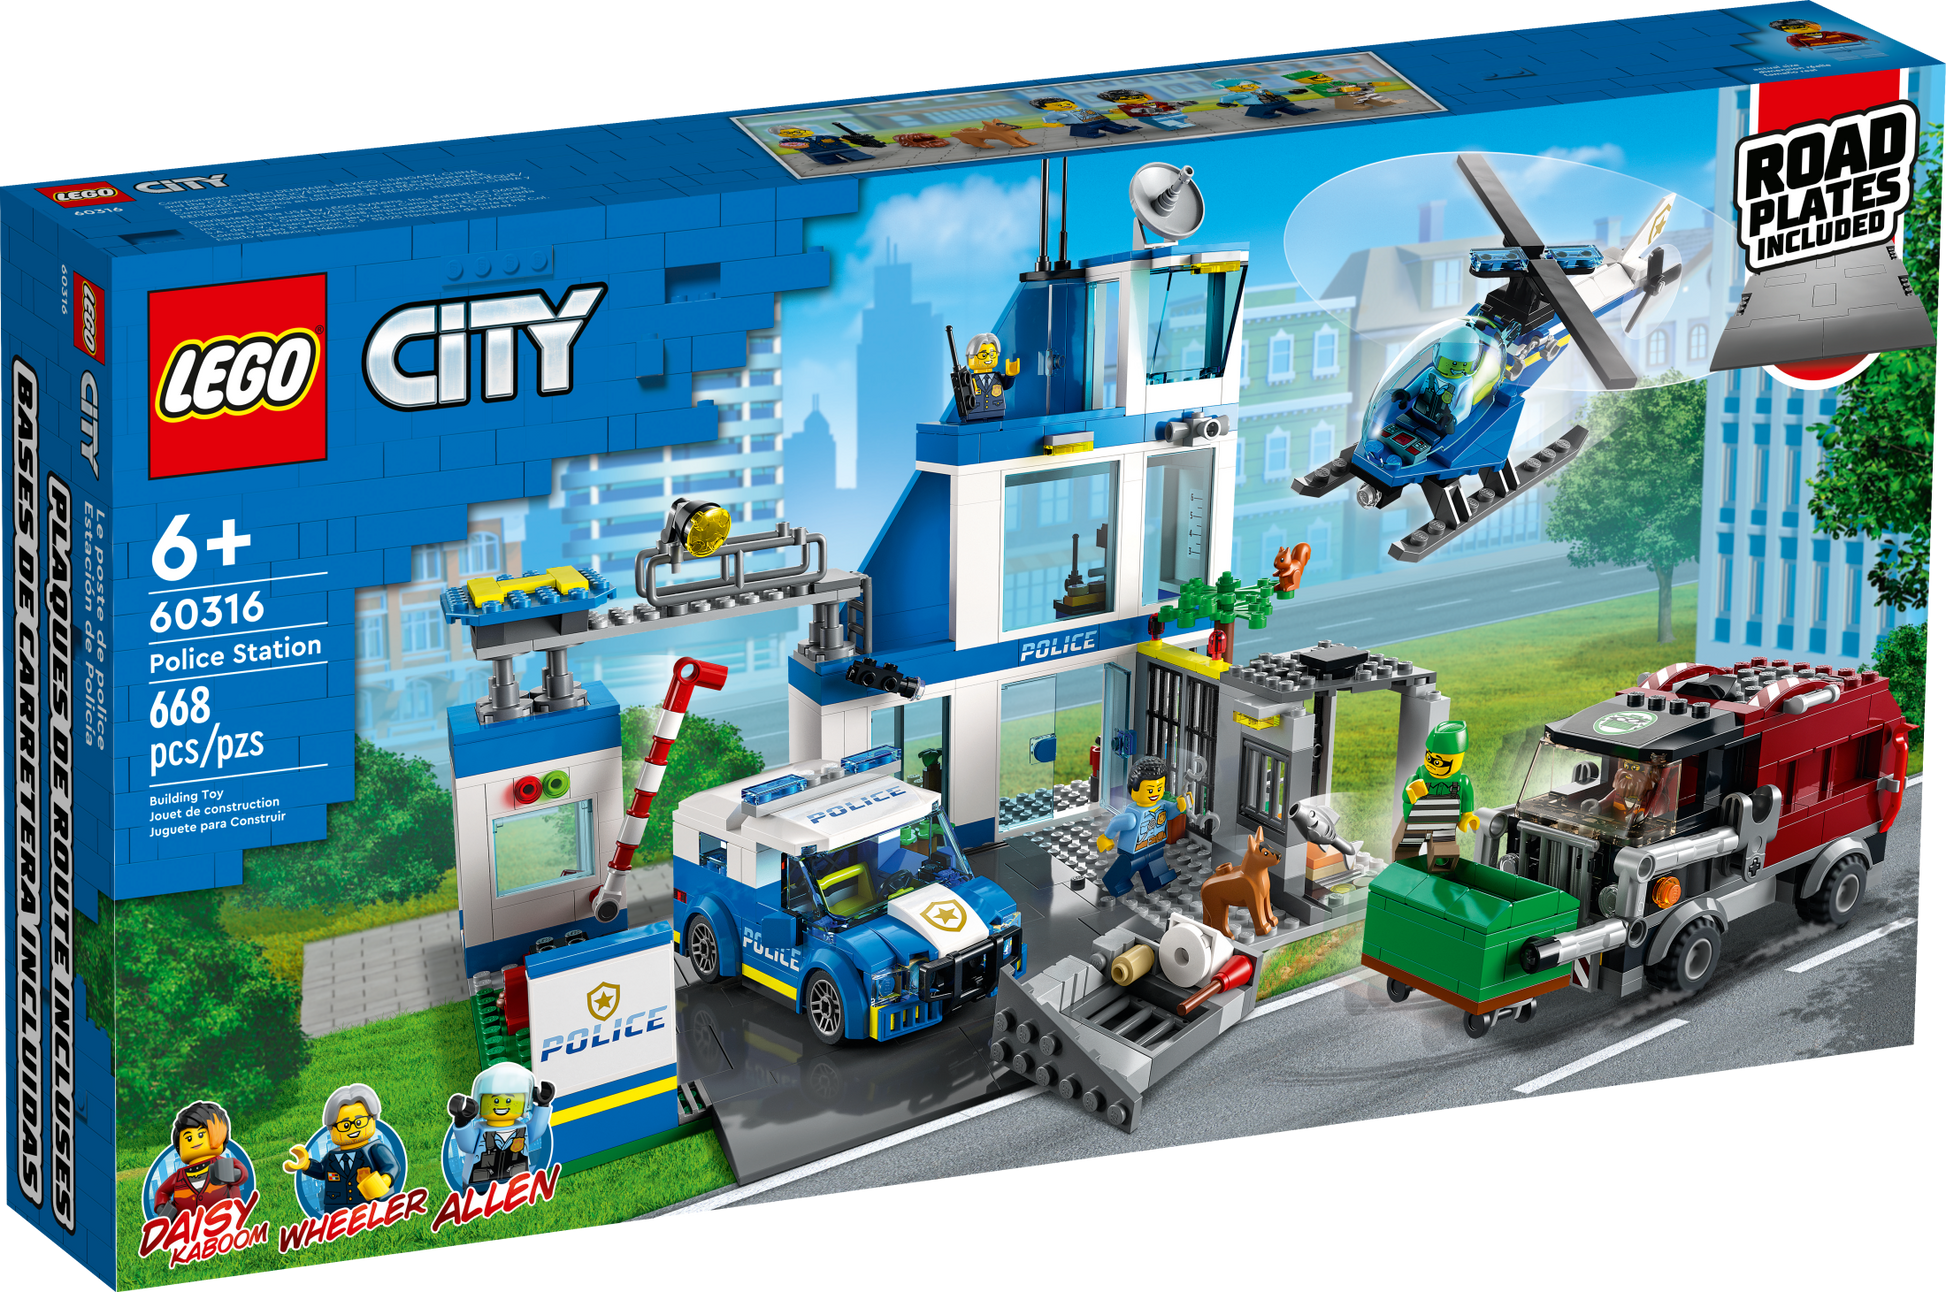 City Police Station with Van, Garbage Truck & Helicopter Toy 60316, Gifts for 6 plus Year Old Kids, Boys & Girls with 5 Minifigures and Dog Toy